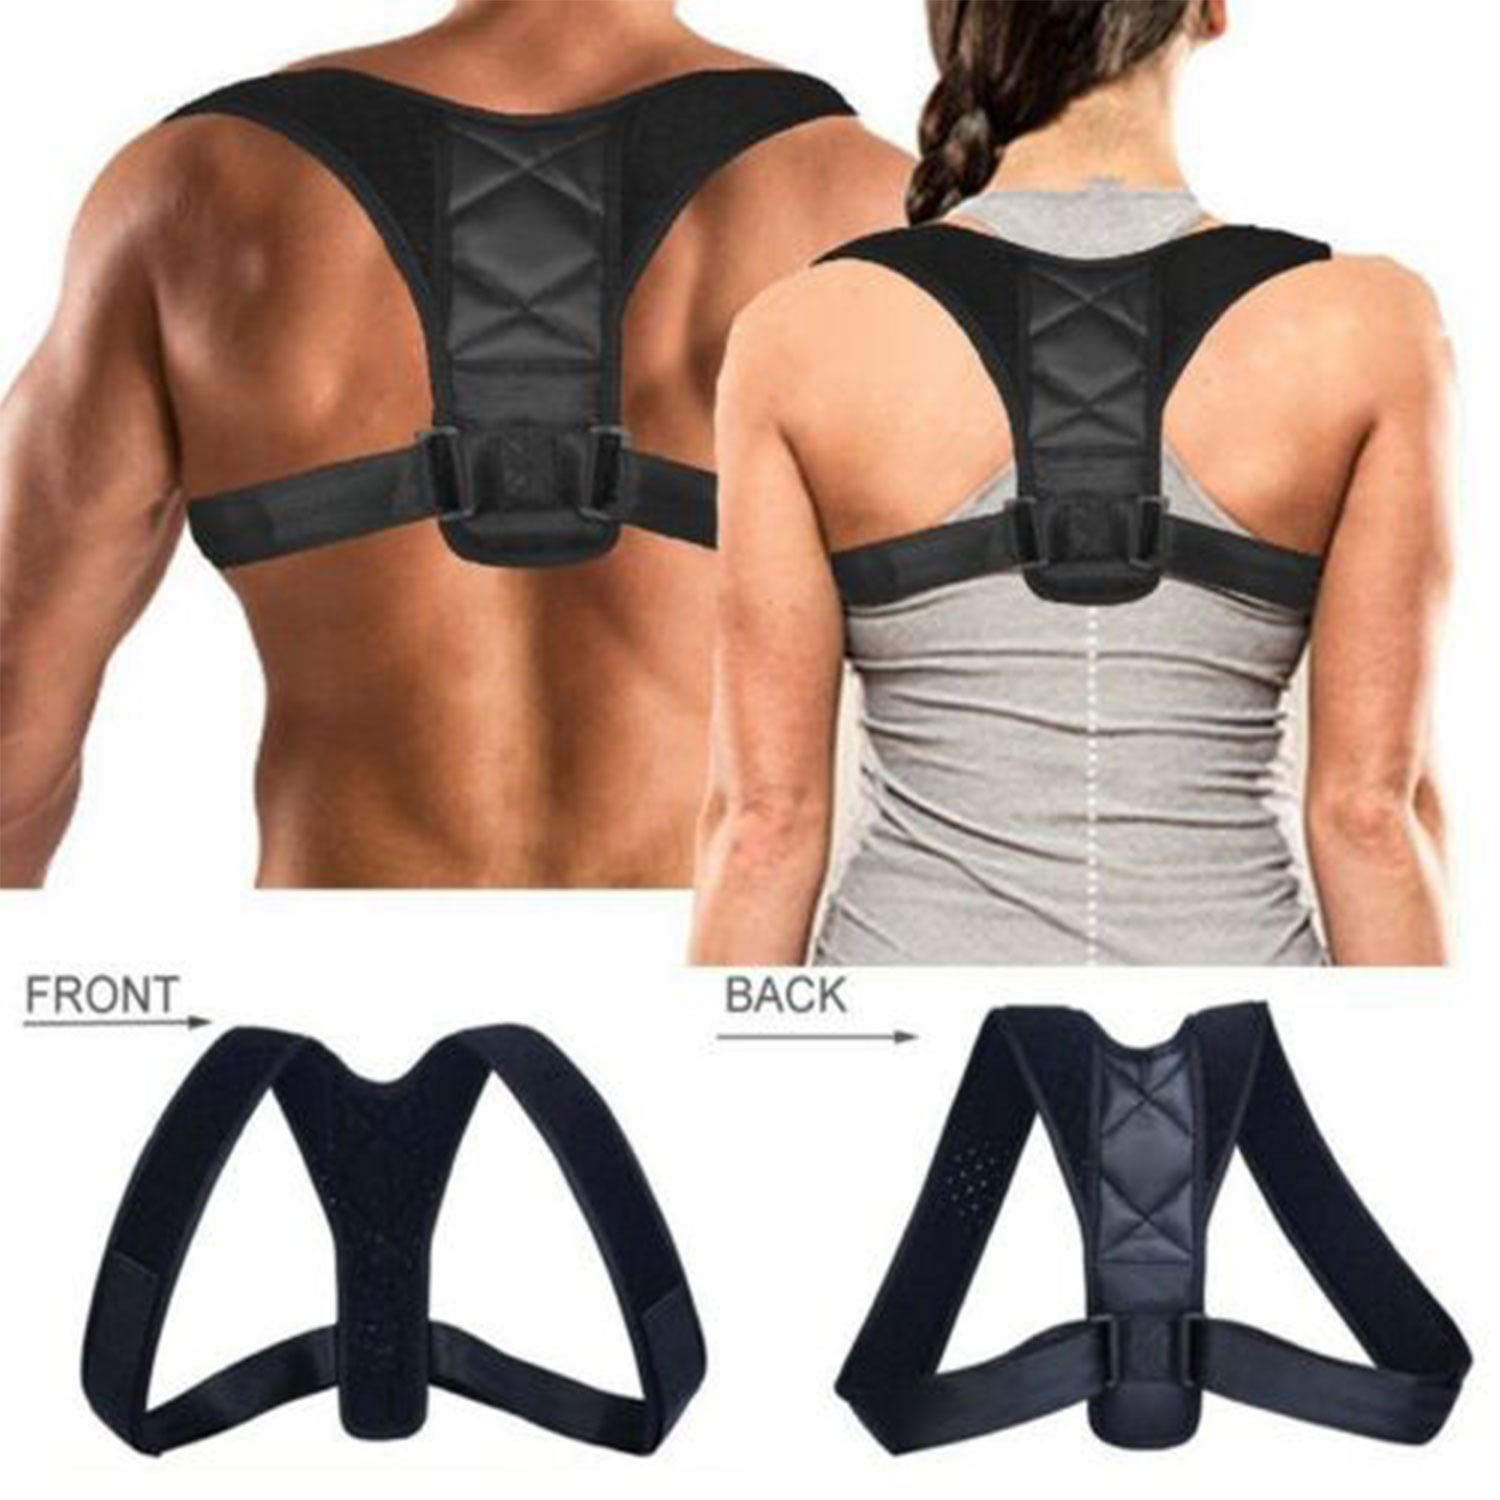 Large Posture Corrector for Women and Men BOSS LV Back Adjustable Brace and Shoulder Support Trainer for Pain Relief and Improve Bad Slouching Problems 